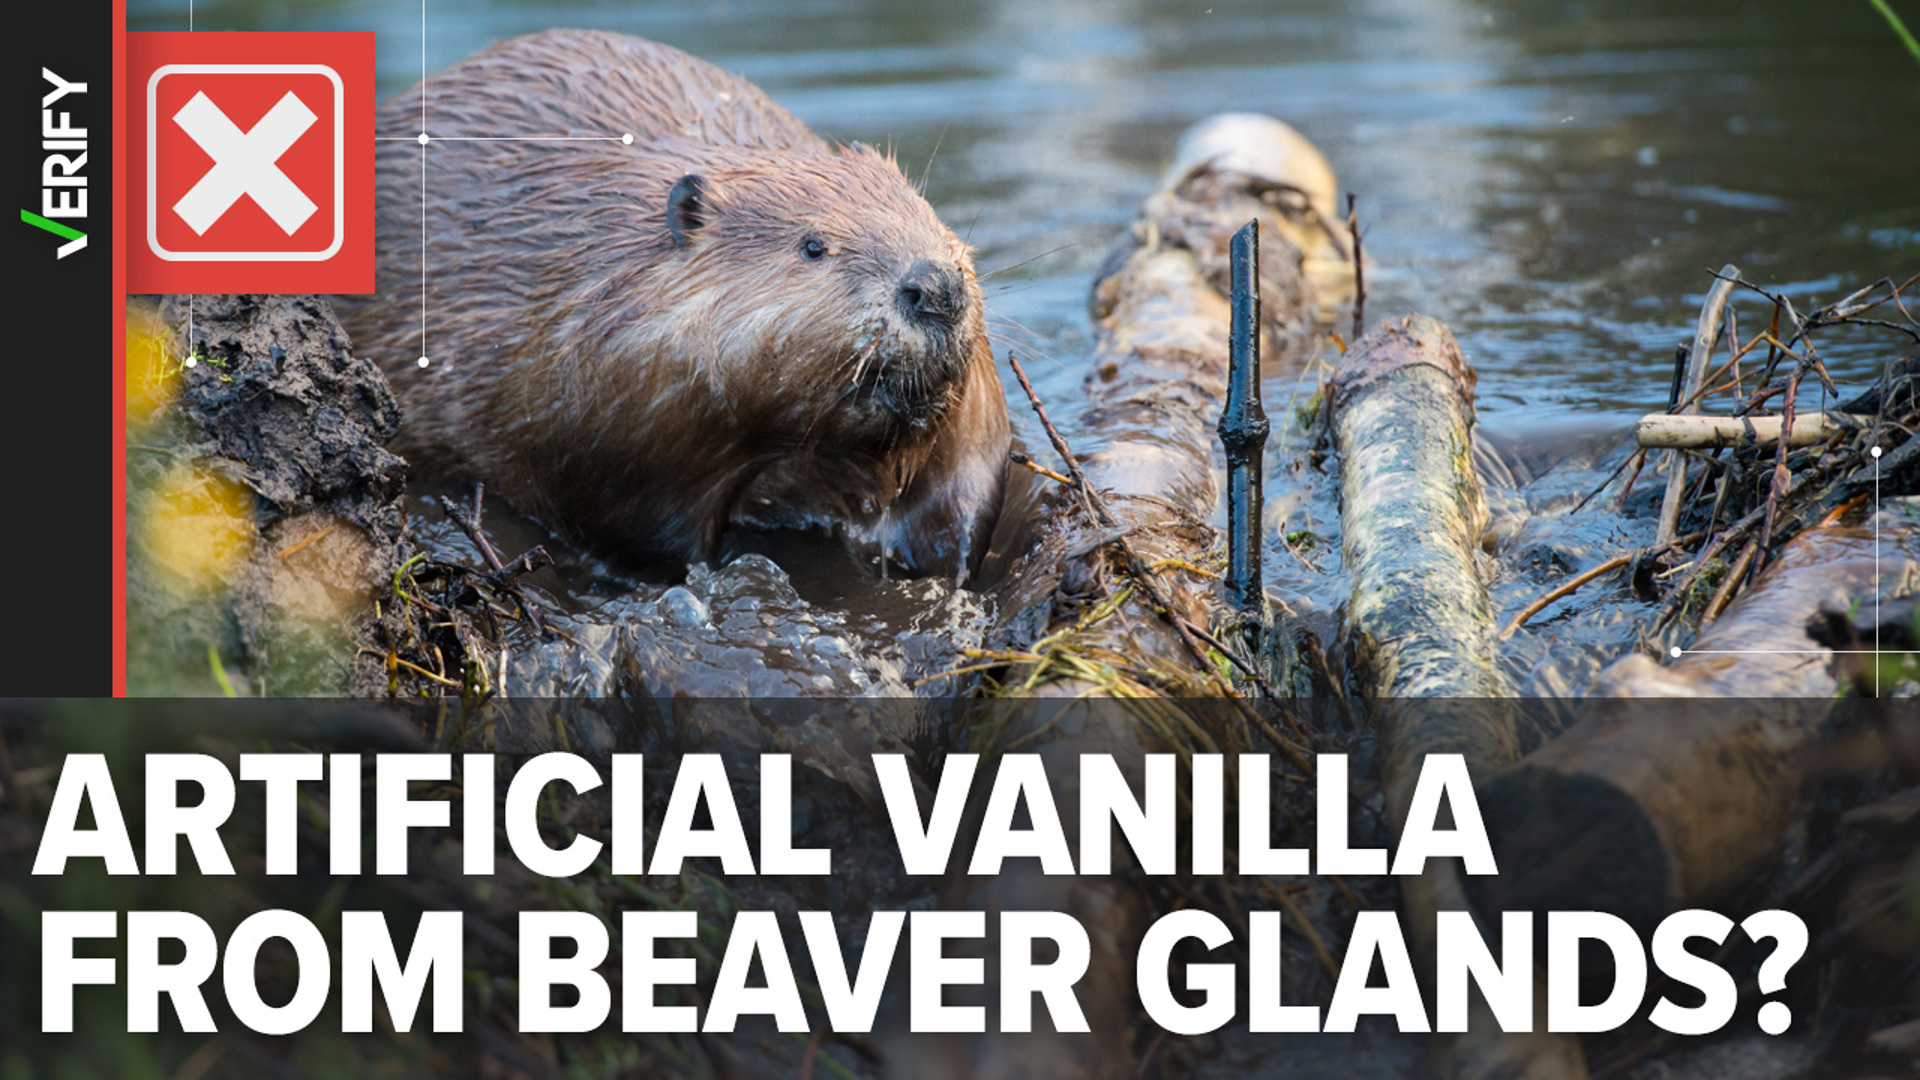 While it’s possible to use beaver gland secretions to make vanilla flavoring, it's an expensive process and not what you'll find in the grocery store.